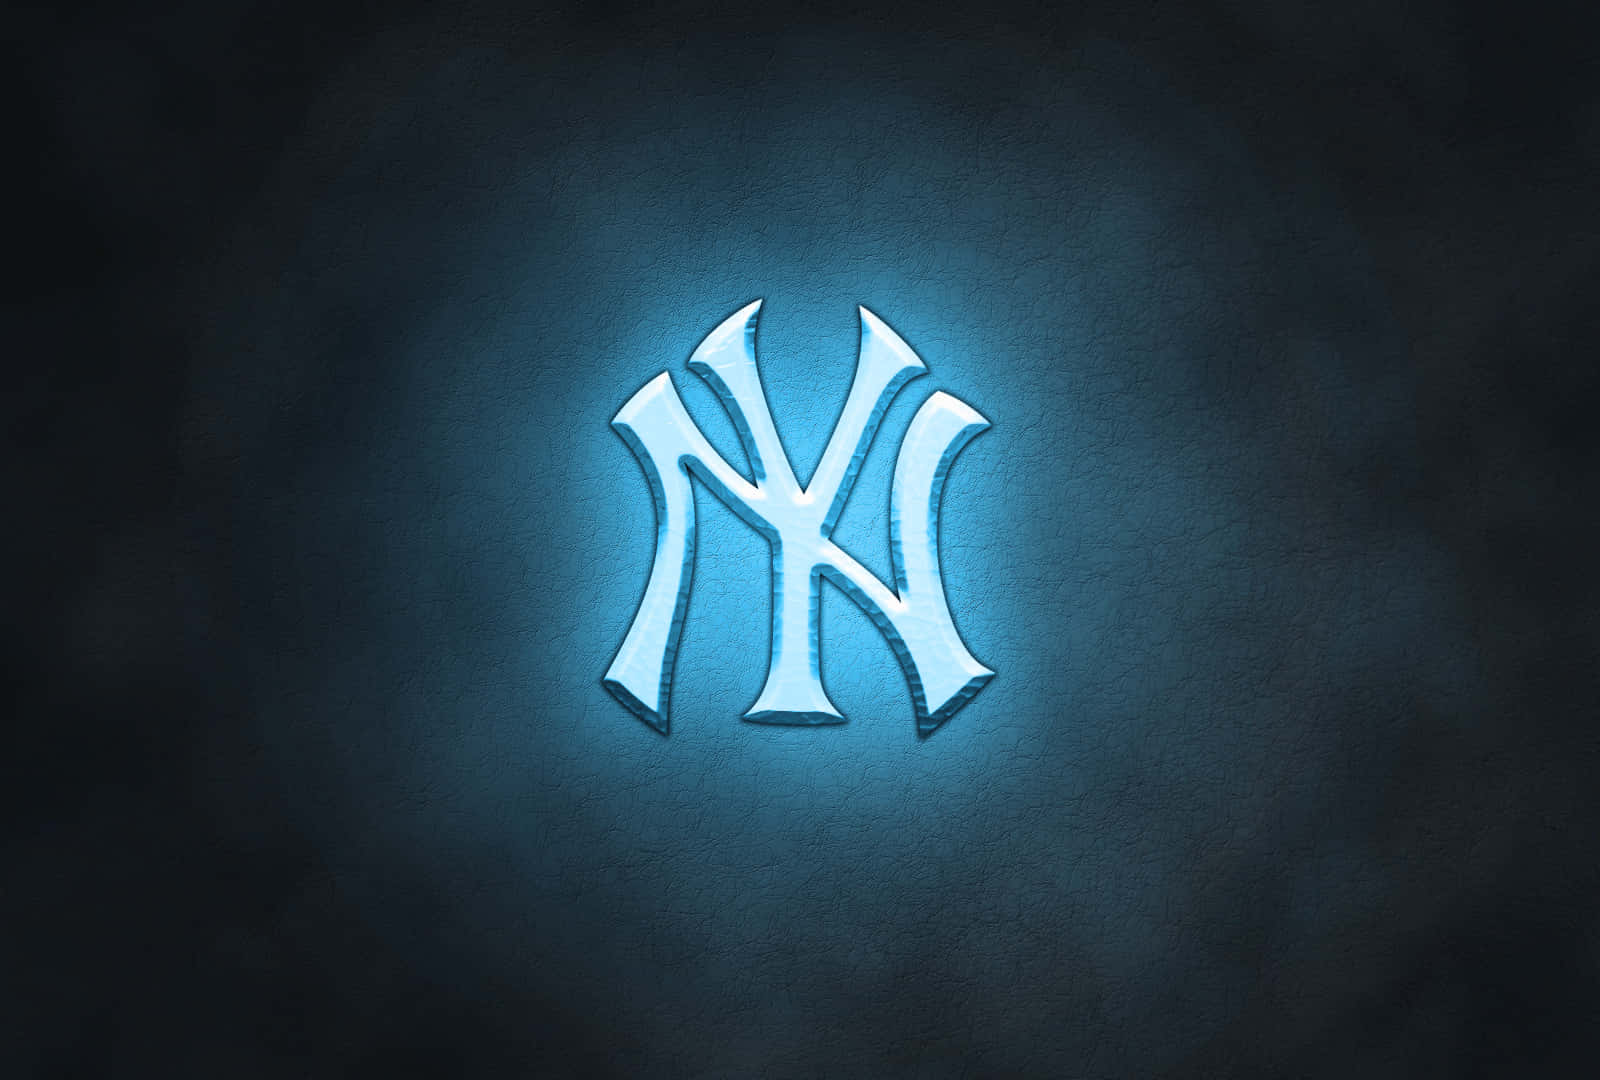 New York Yankees fans cheer on their team at the iconic Yankee Stadium. Wallpaper